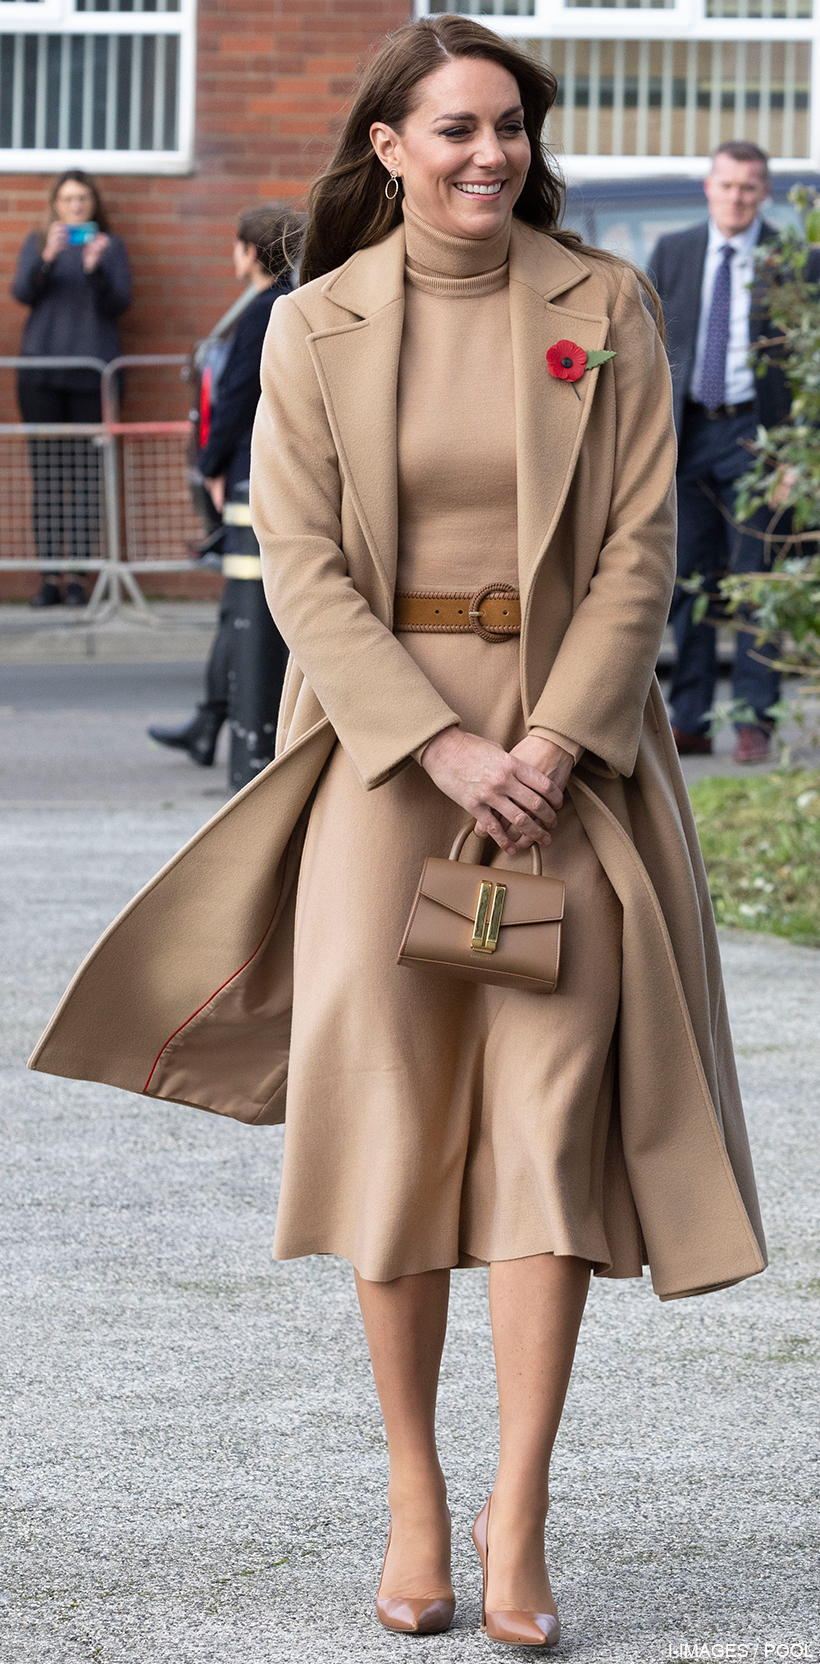 Kate Middleton visiting Scarborough on the 3rd of November 2022 wearing a camel coat, camel skirt and top and matching brown belt and shoes.